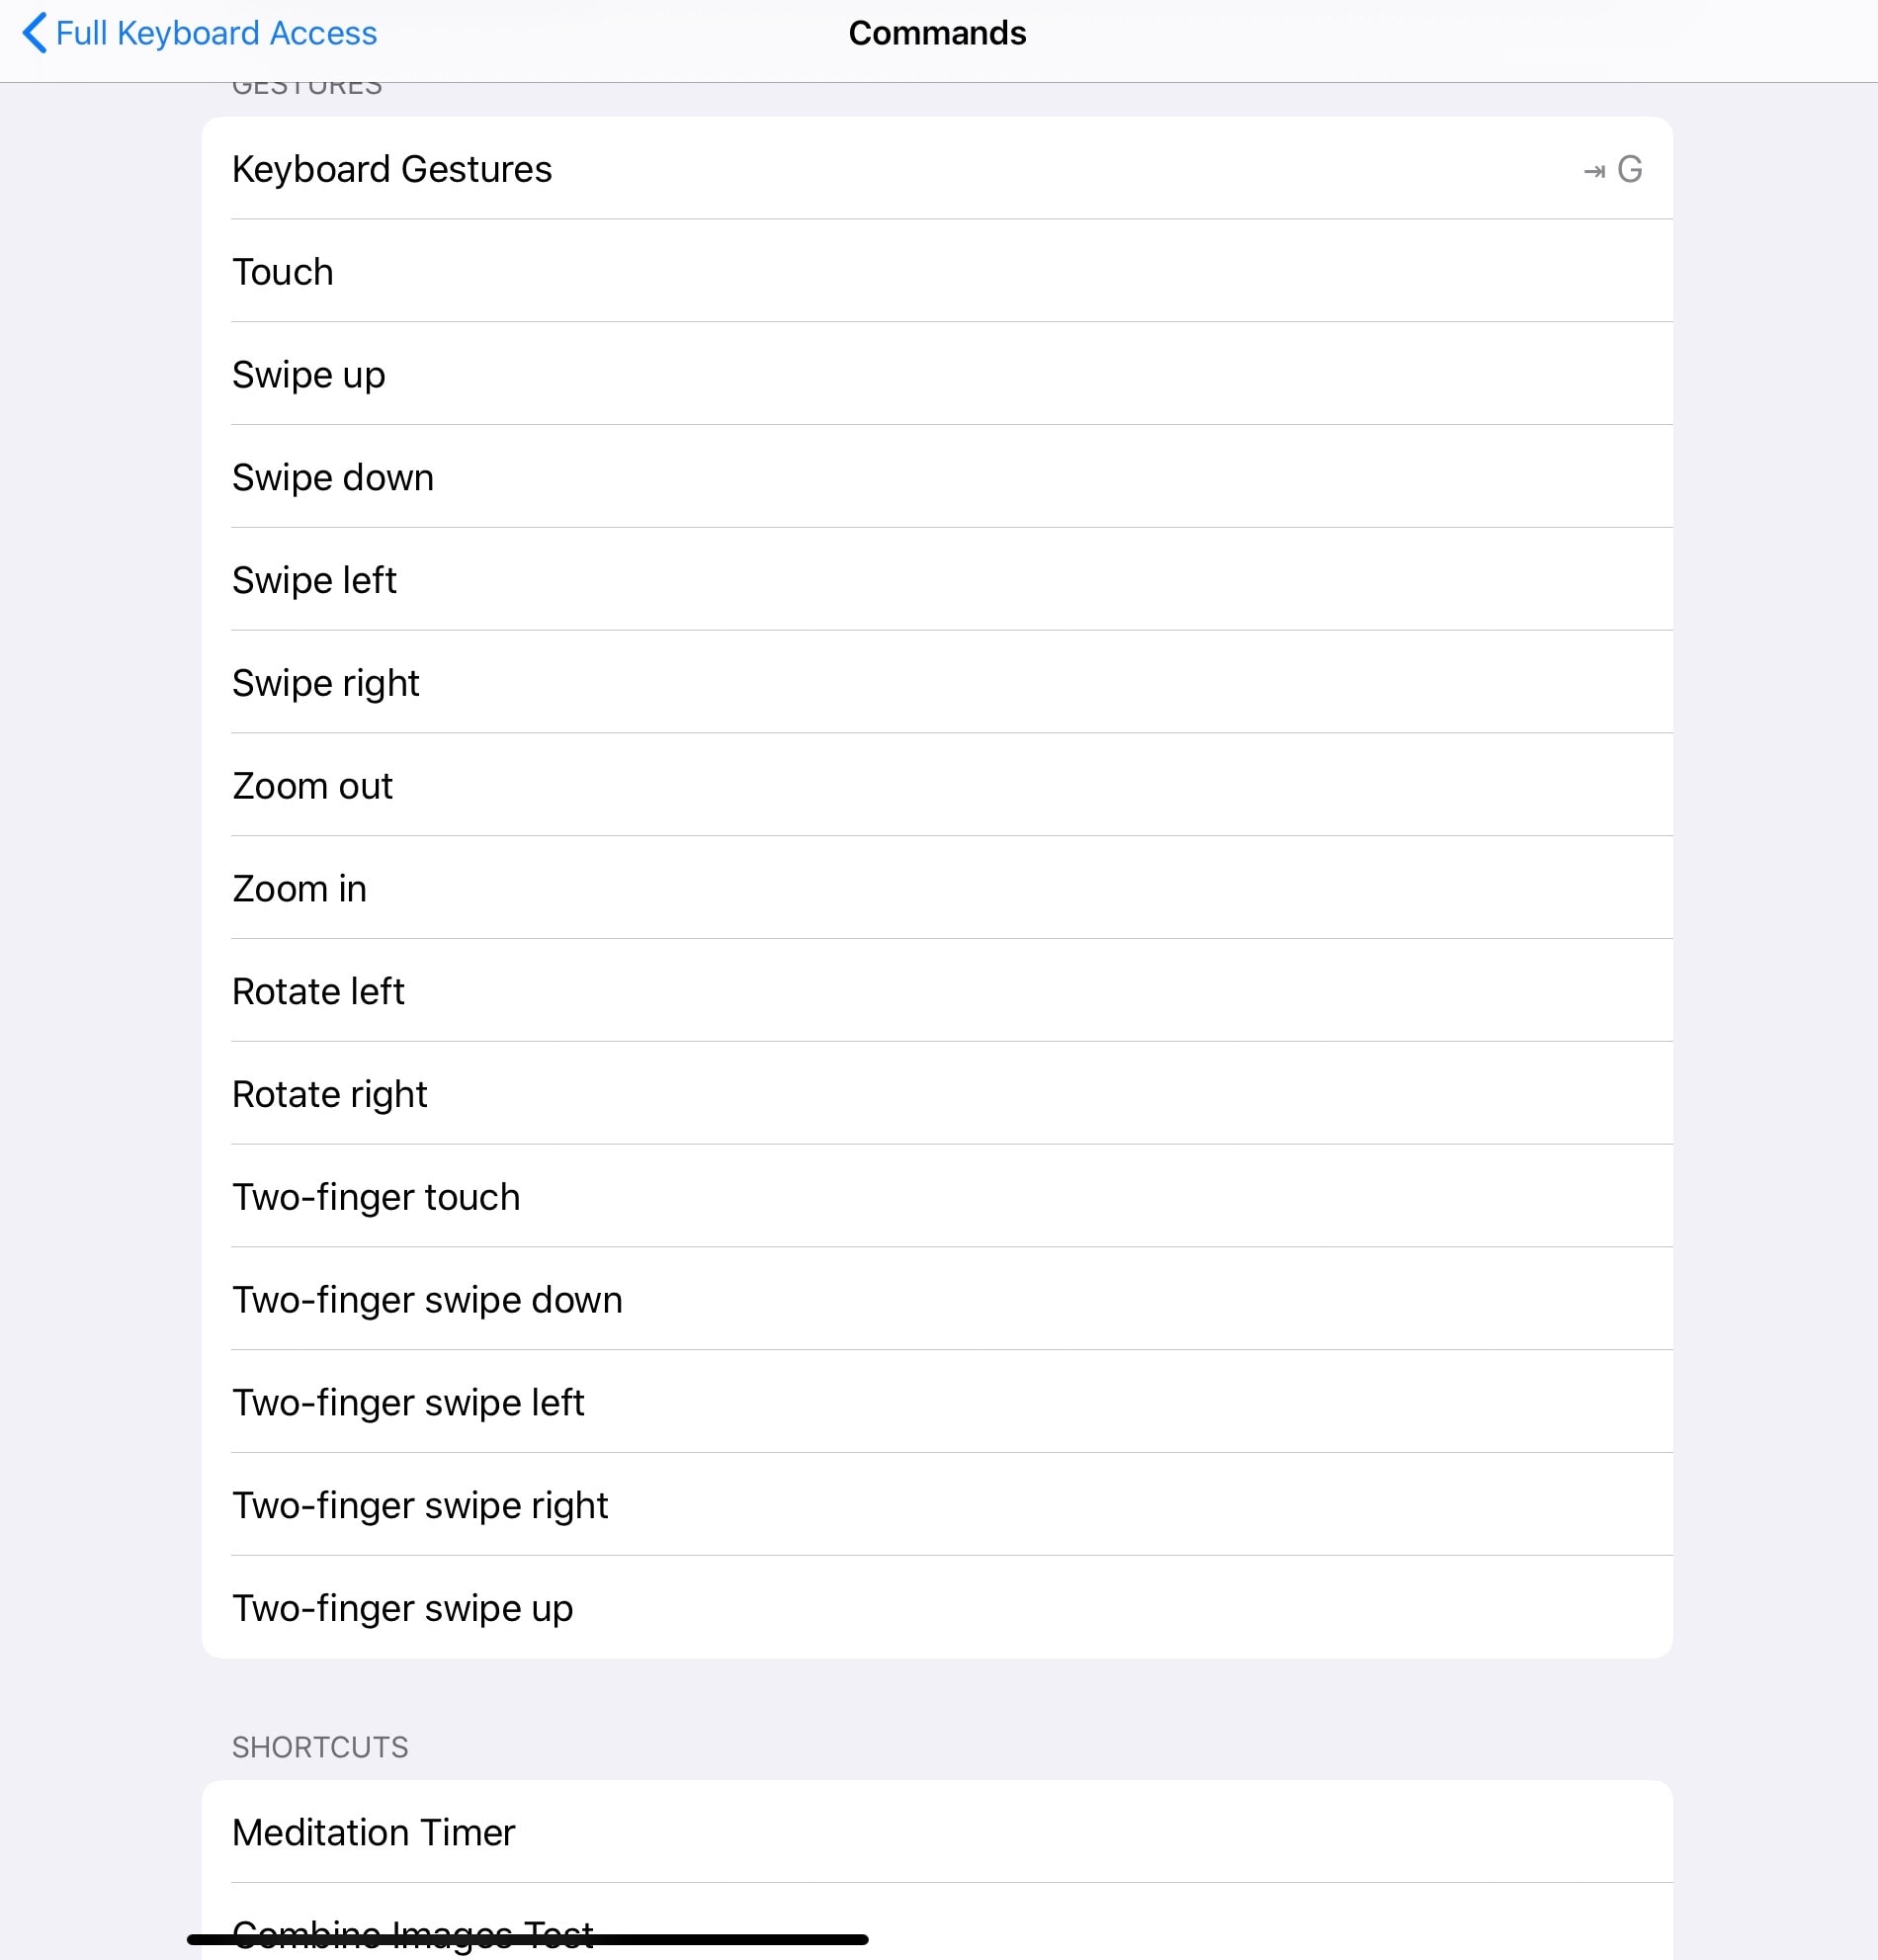 Full Keyboard Access in the iPadOS 13.4 beta offers custom commands. 